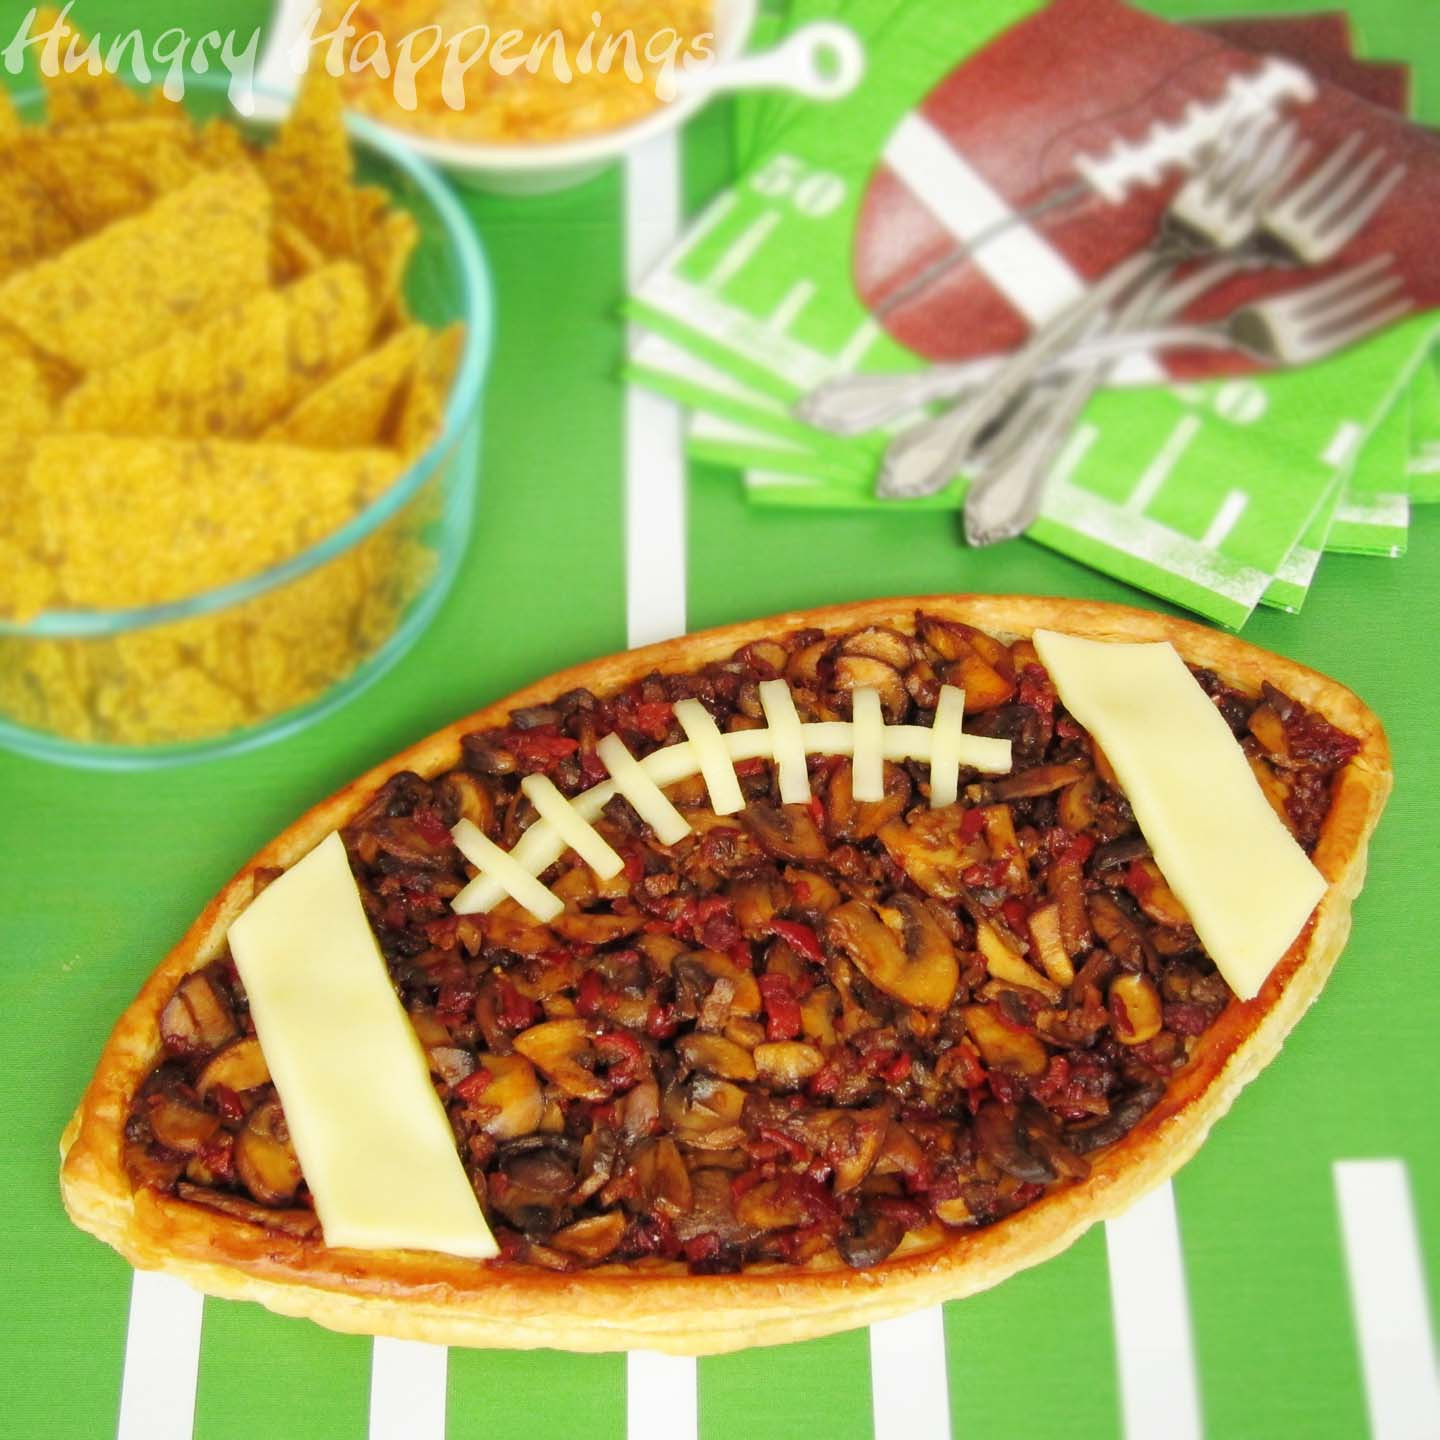 Superbowl Snacks Recipes
 Beer Mug Cheese Stuffed Football Pretzels for Tablespoon